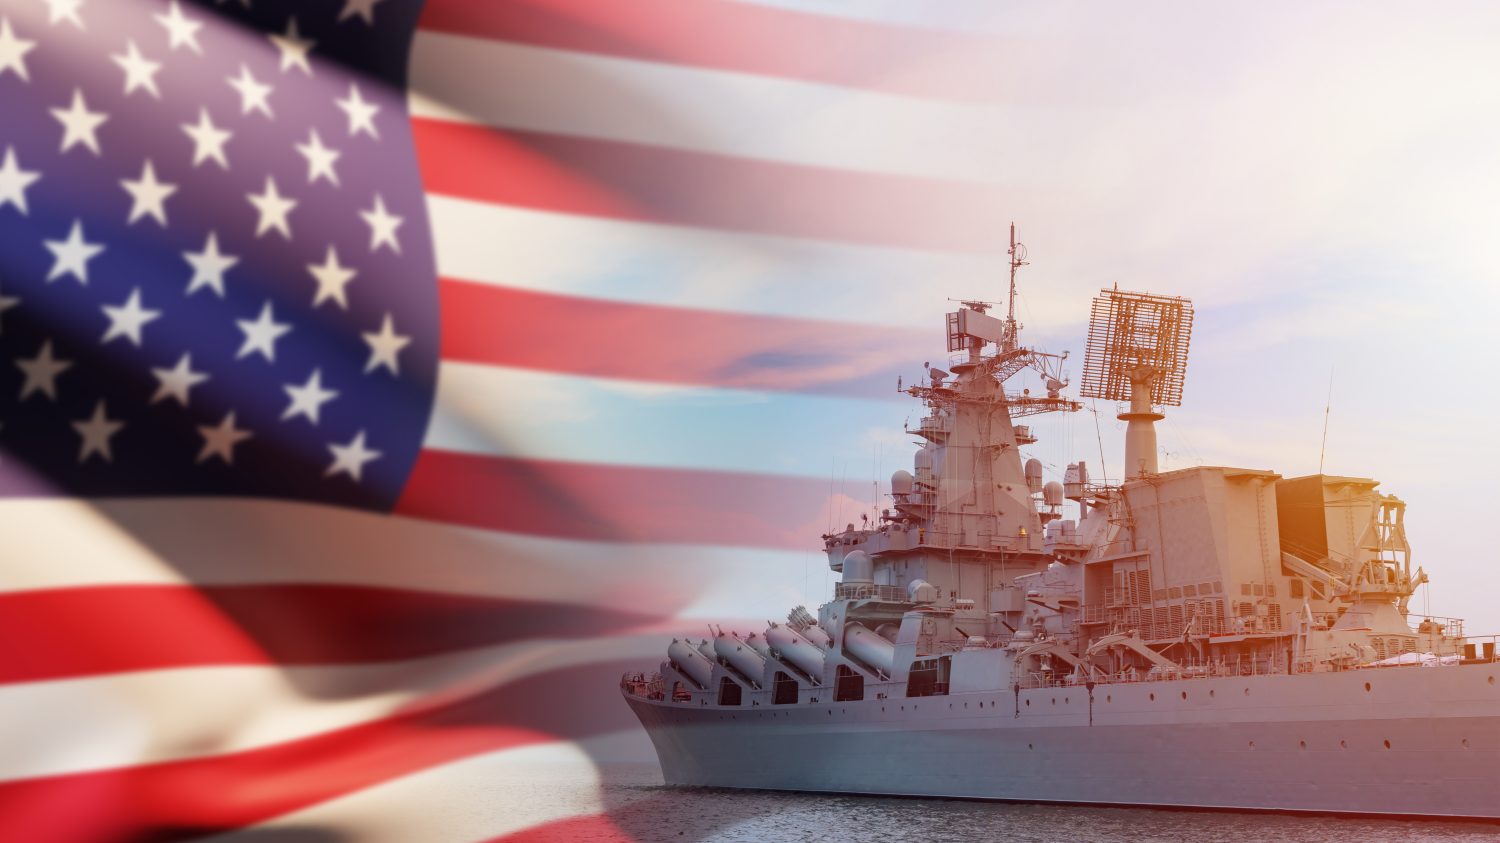 American Navy. Missile cruiser on the background of the US flag. American warship with missiles and radars. Fleet of USA. Naval forces of United States of America. Missile cruiser at sea or ocean.